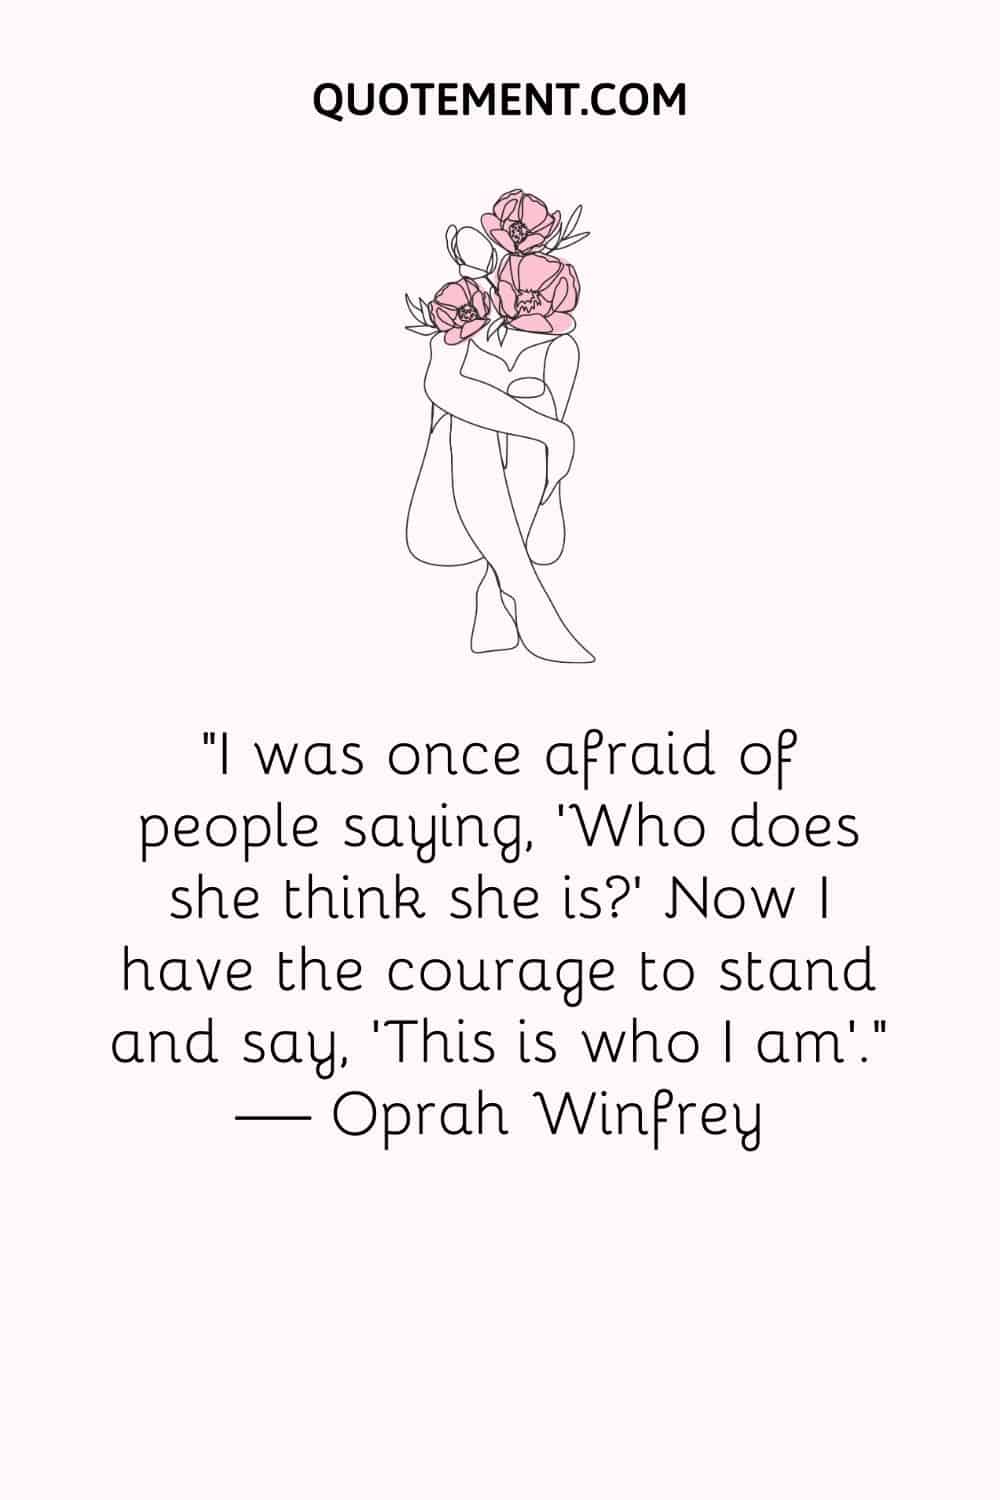 I was once afraid of people saying, 'Who does she think she is'